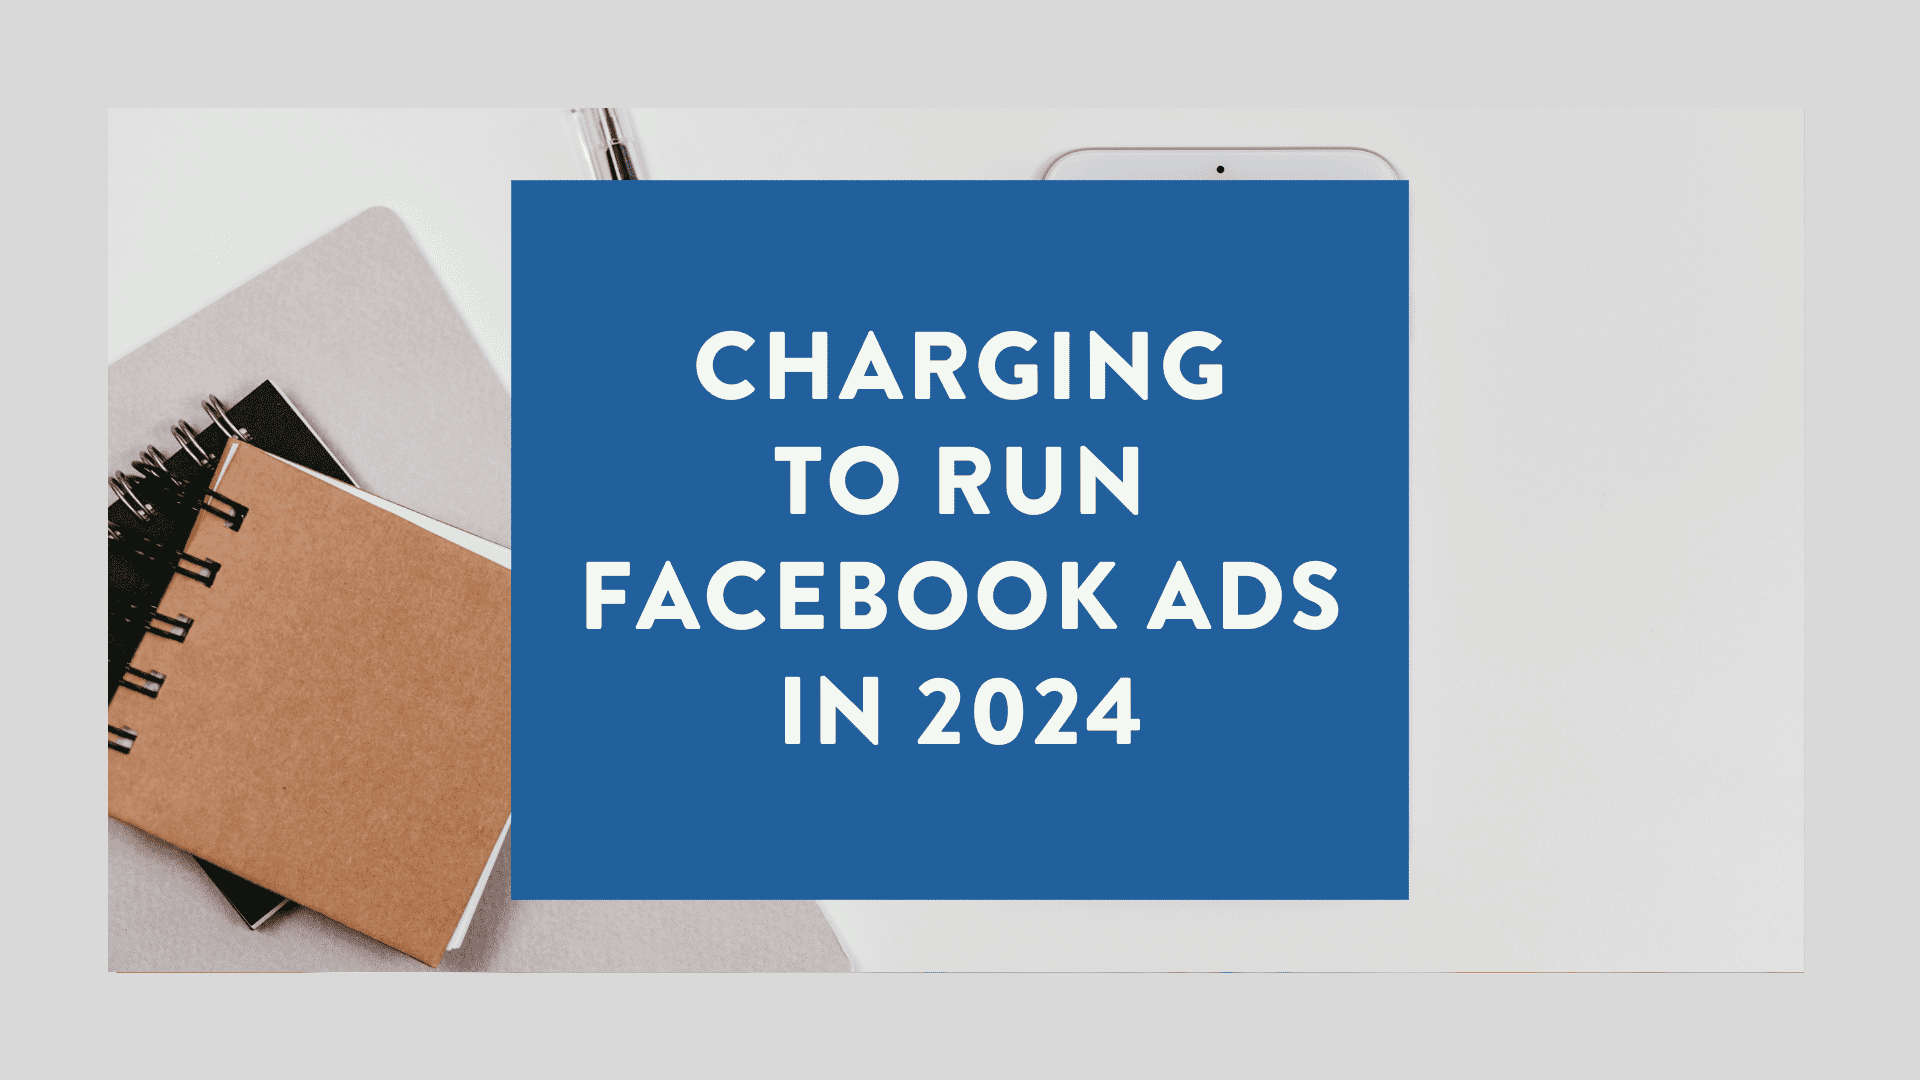 Charging to run Facebook ads in 2024